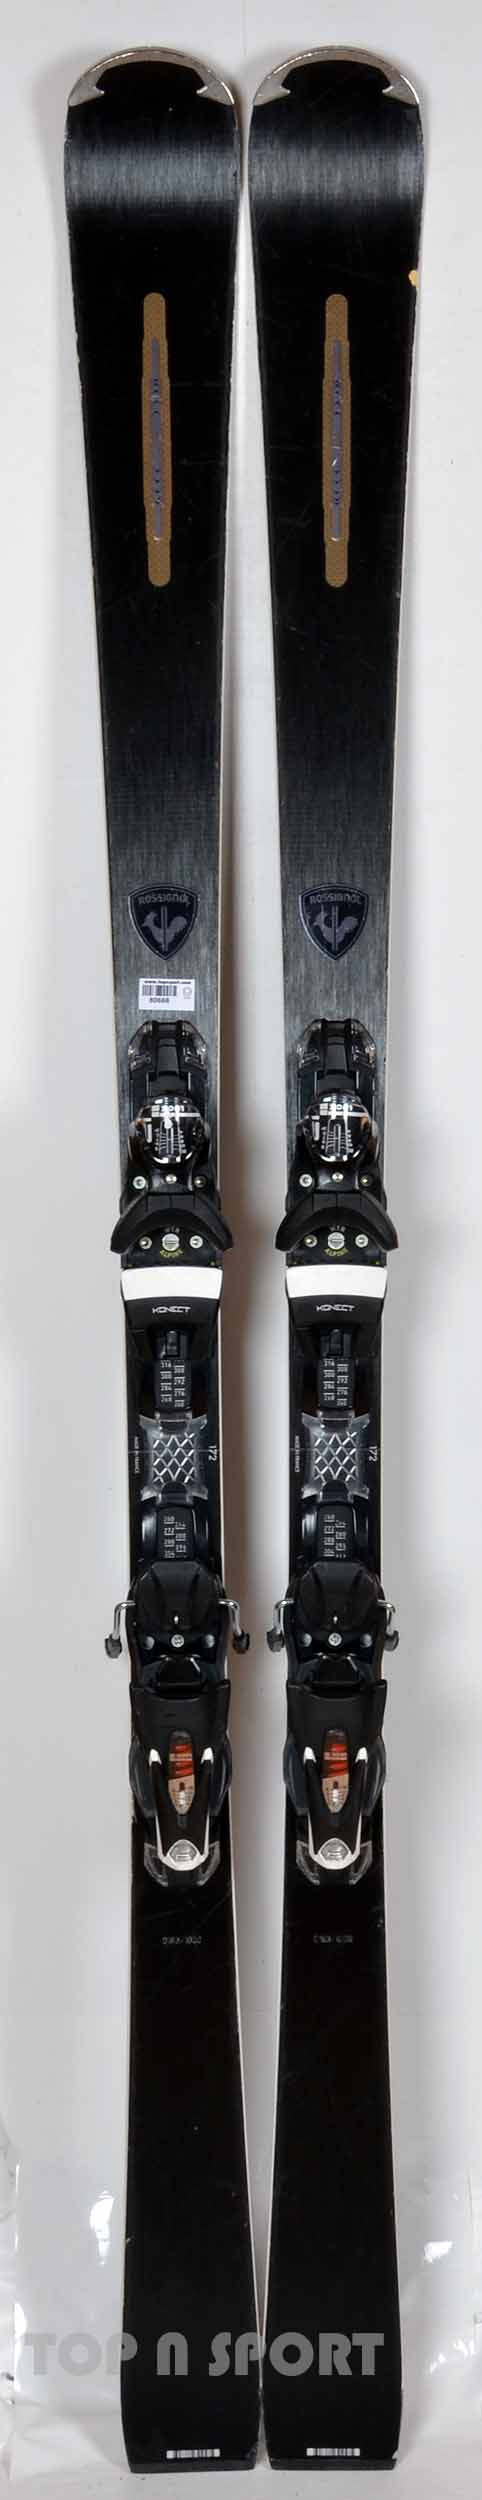 Rossignol STRATO BLACK EDITION LIMITÉE - skis d'occasion